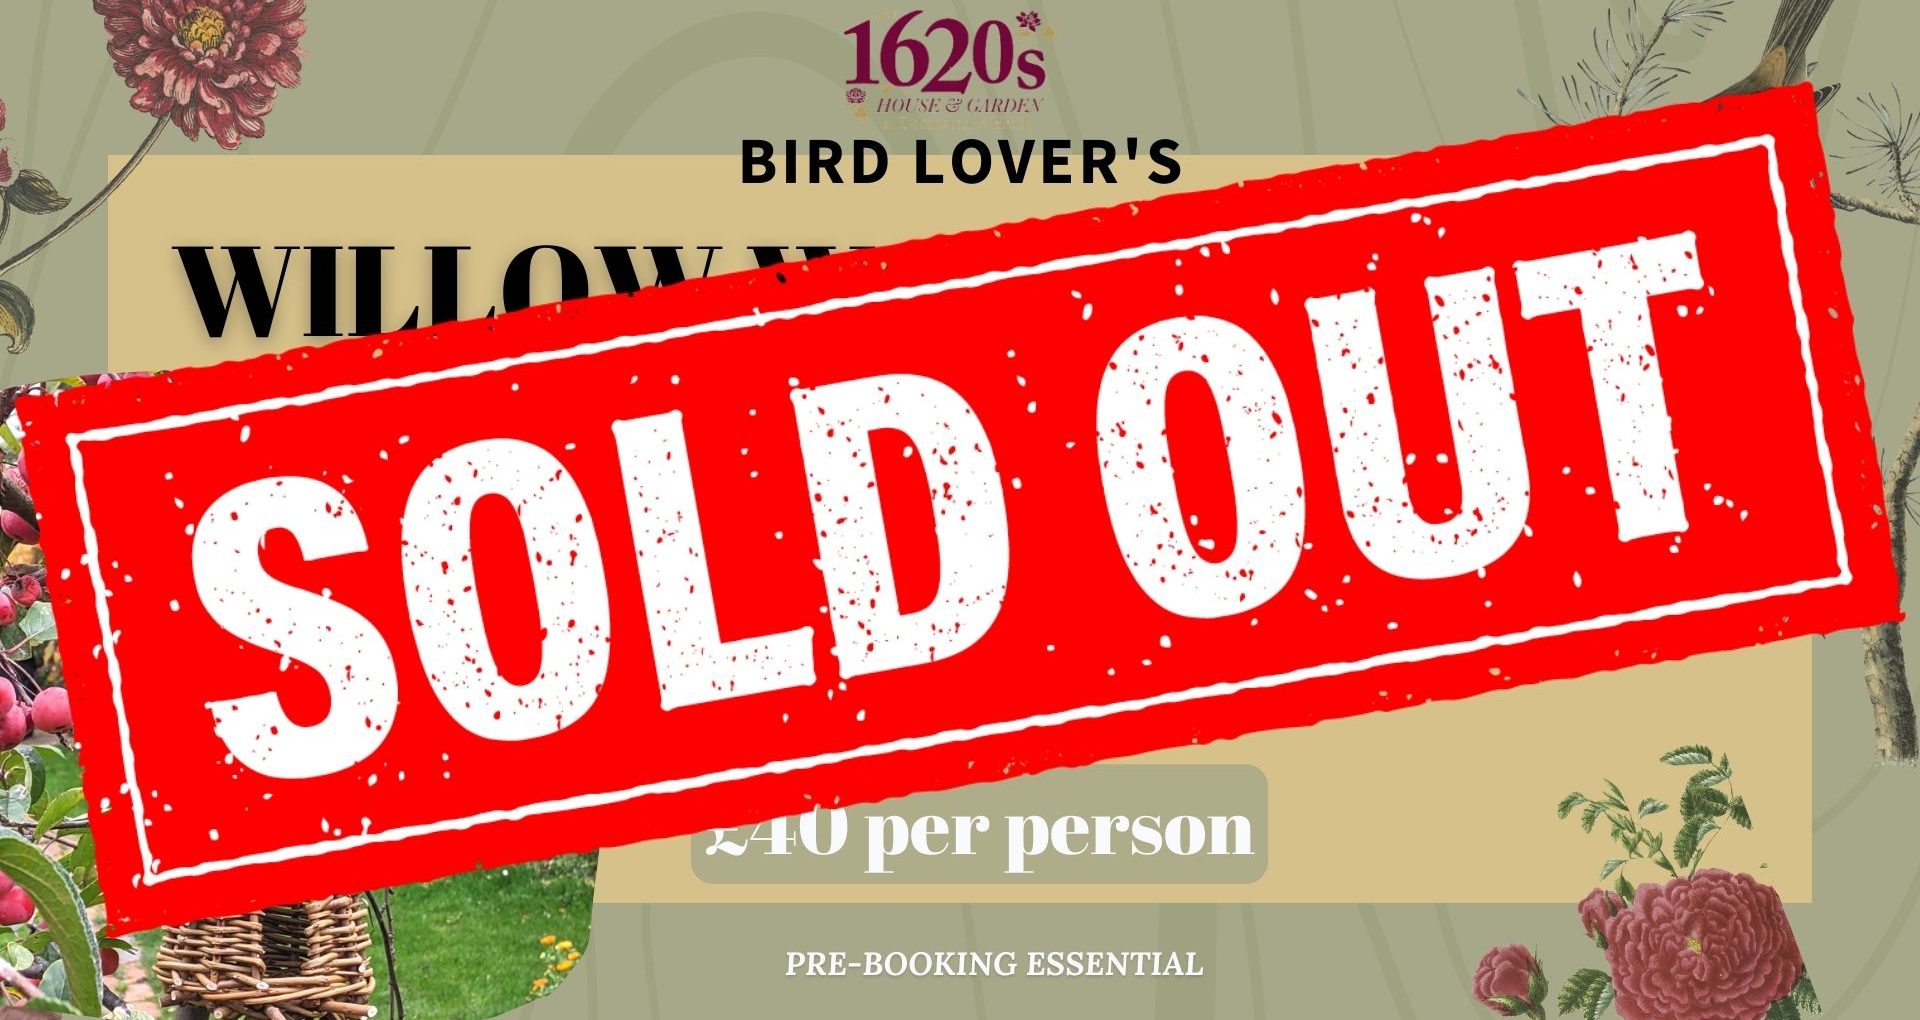 SOLD OUT - Bird Lover's Willow Workshops - Bird House